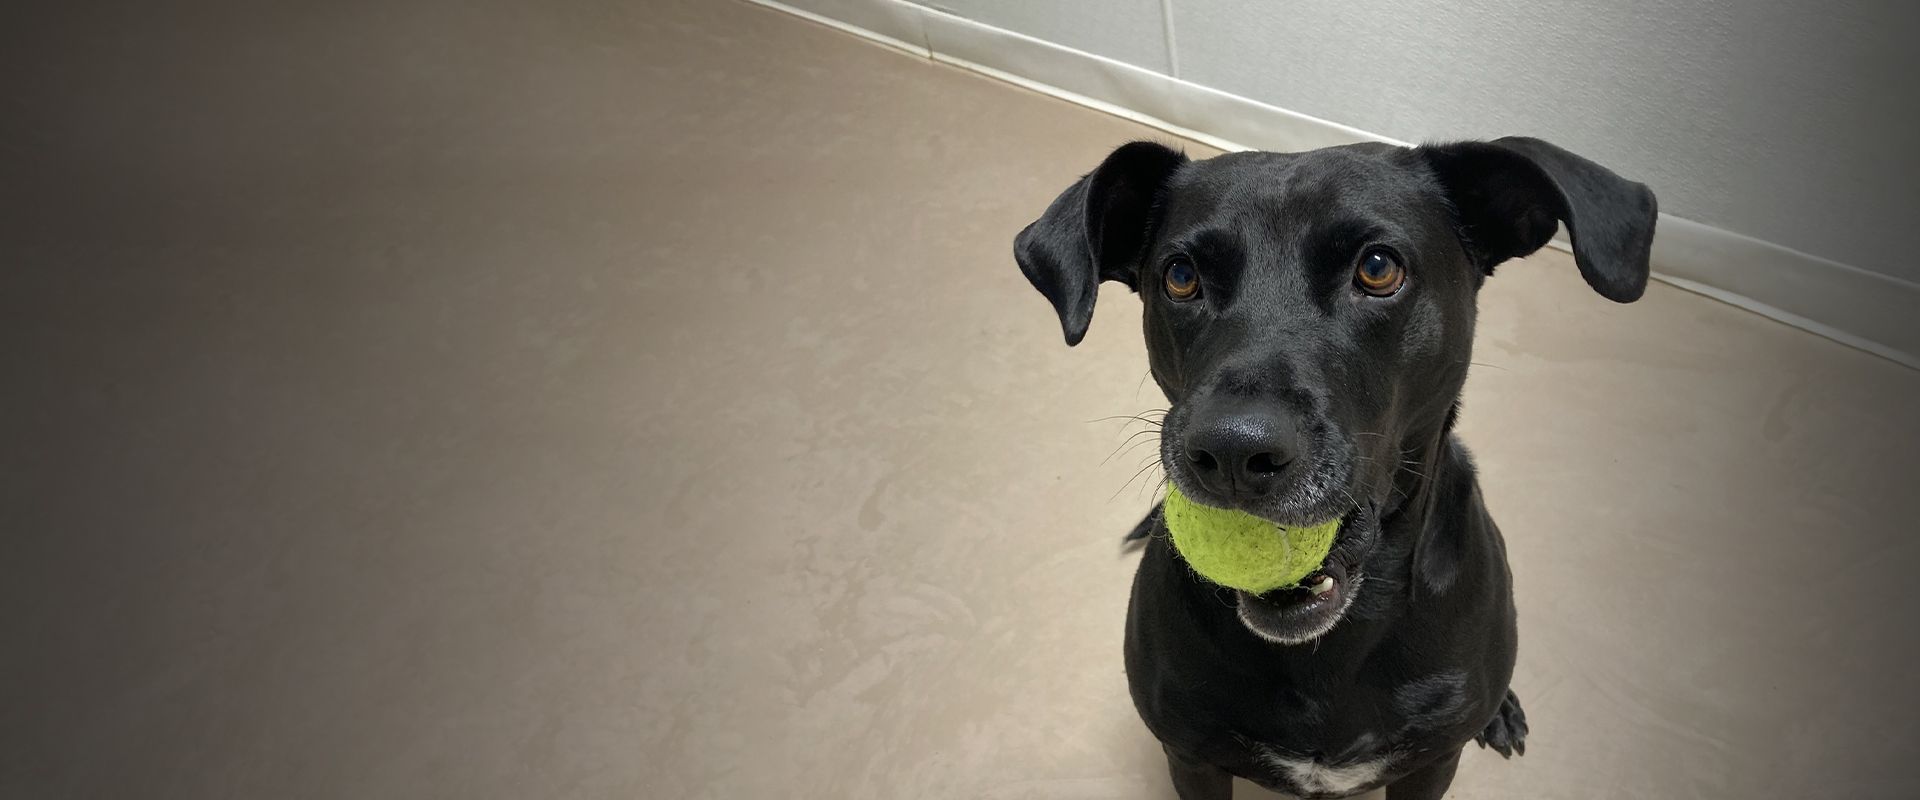 black dog with a tennis ball in his mouth at woof pet resort